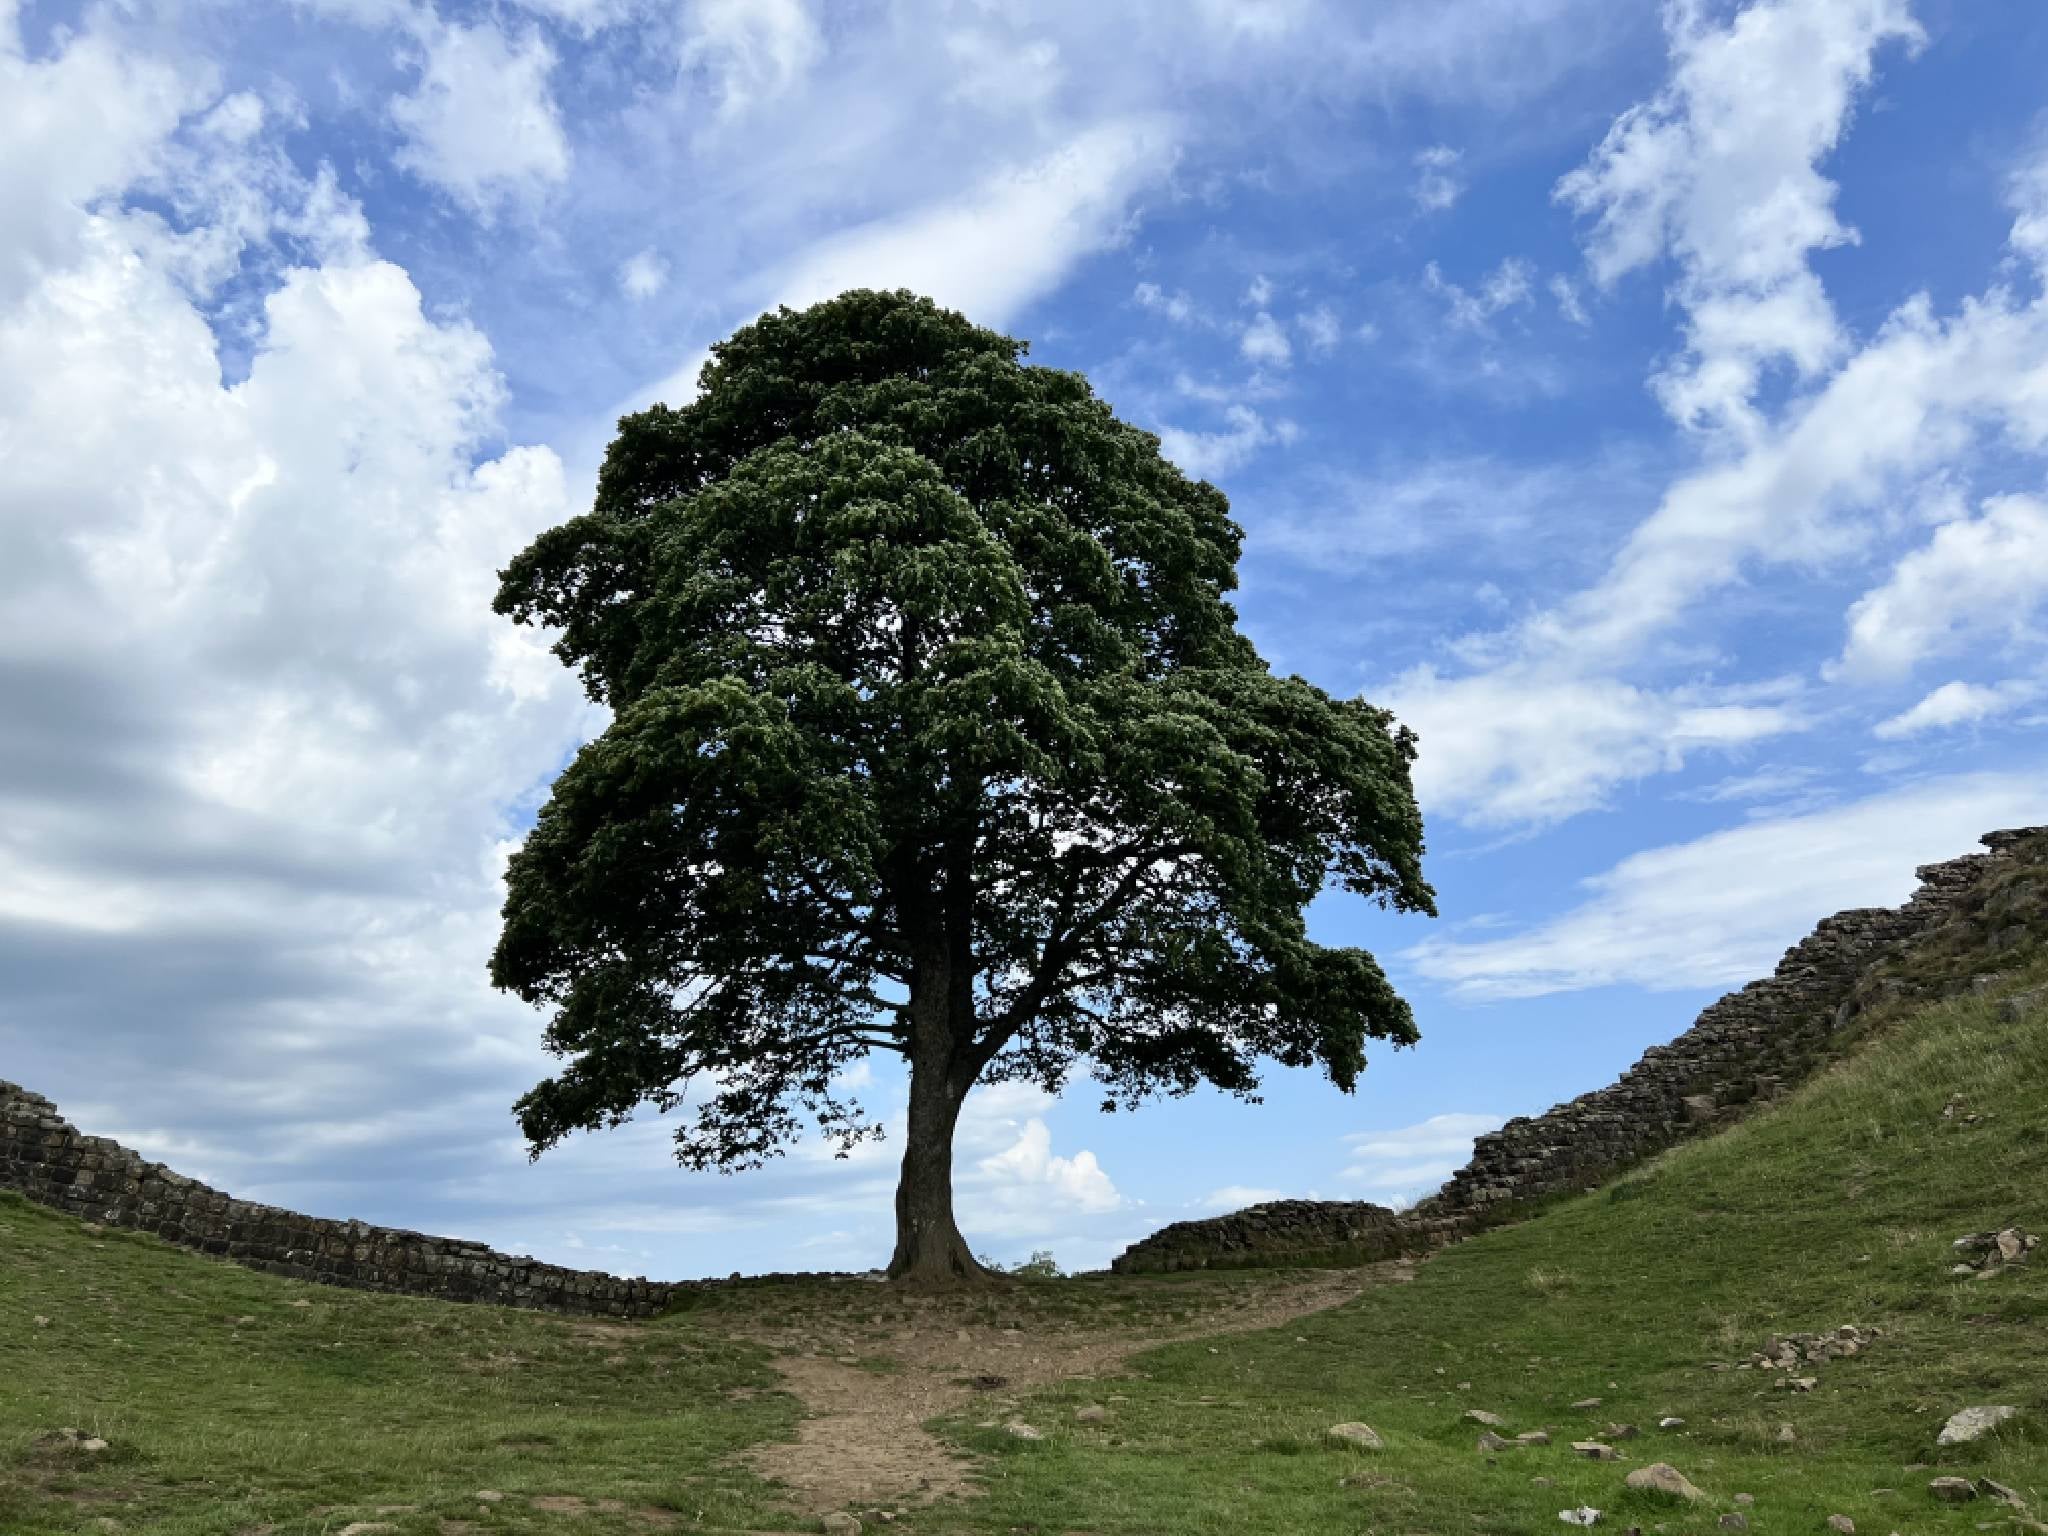 Famous Northumberland landmark Sycamore Gap is half an hour’s drive from the hut